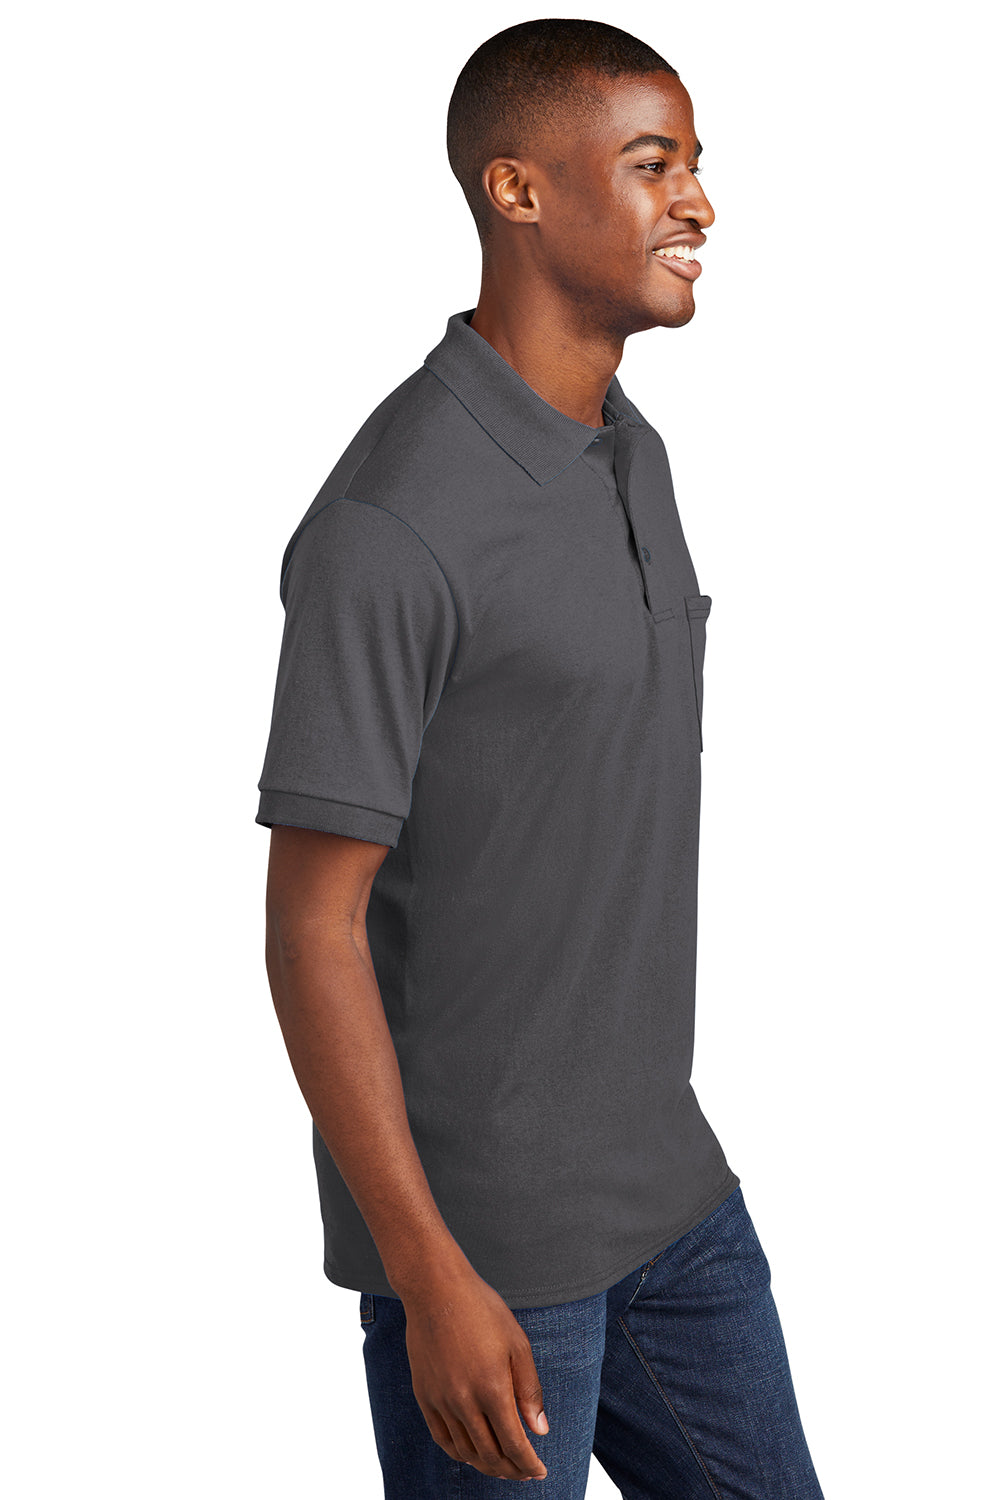 Port & Company KP55P Mens Core Stain Resistant Short Sleeve Polo Shirt w/ Pocket Charcoal Grey Side